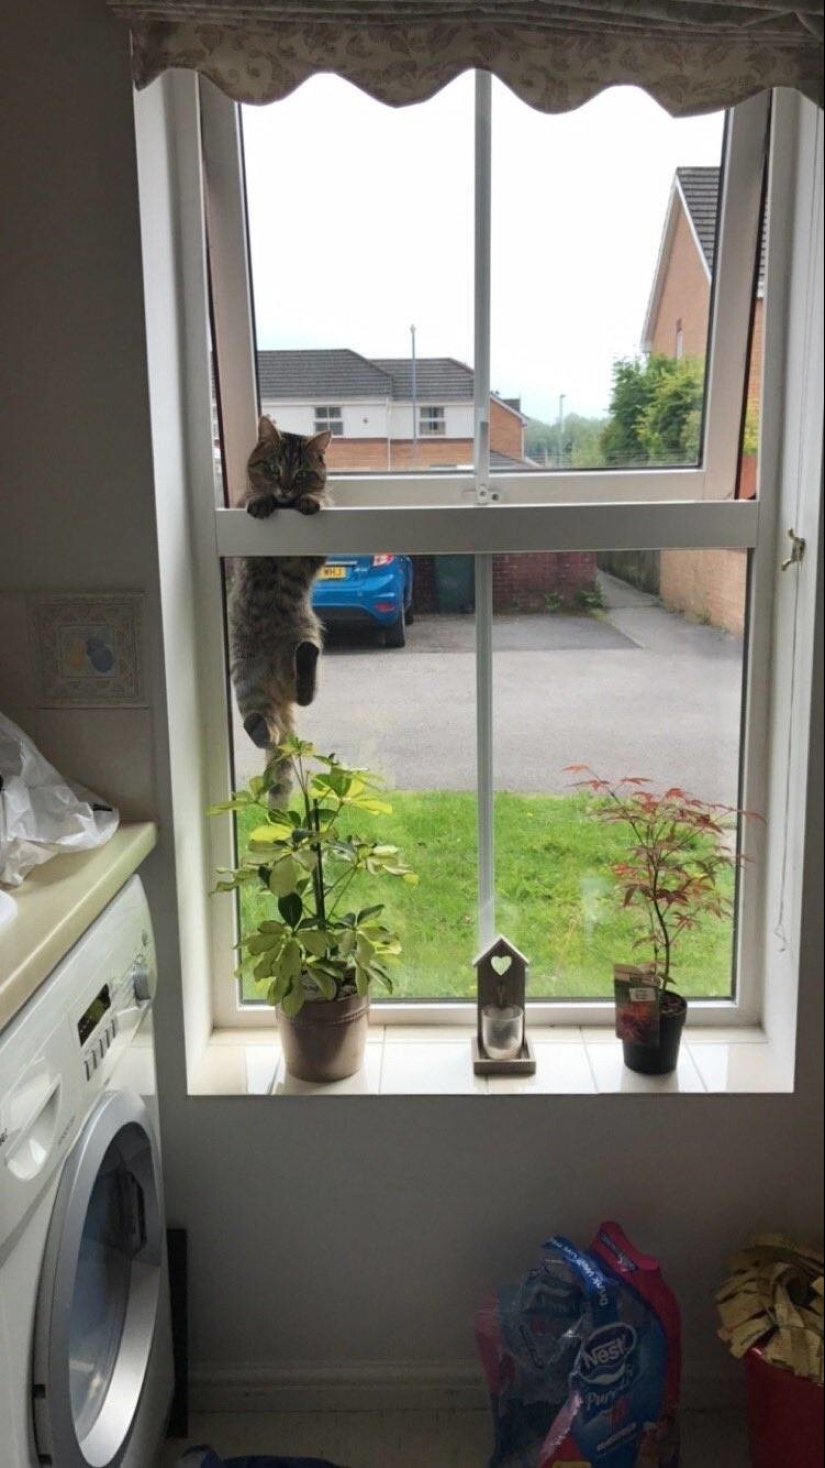 My house, my cat: photo of cats that walk on other people's homes